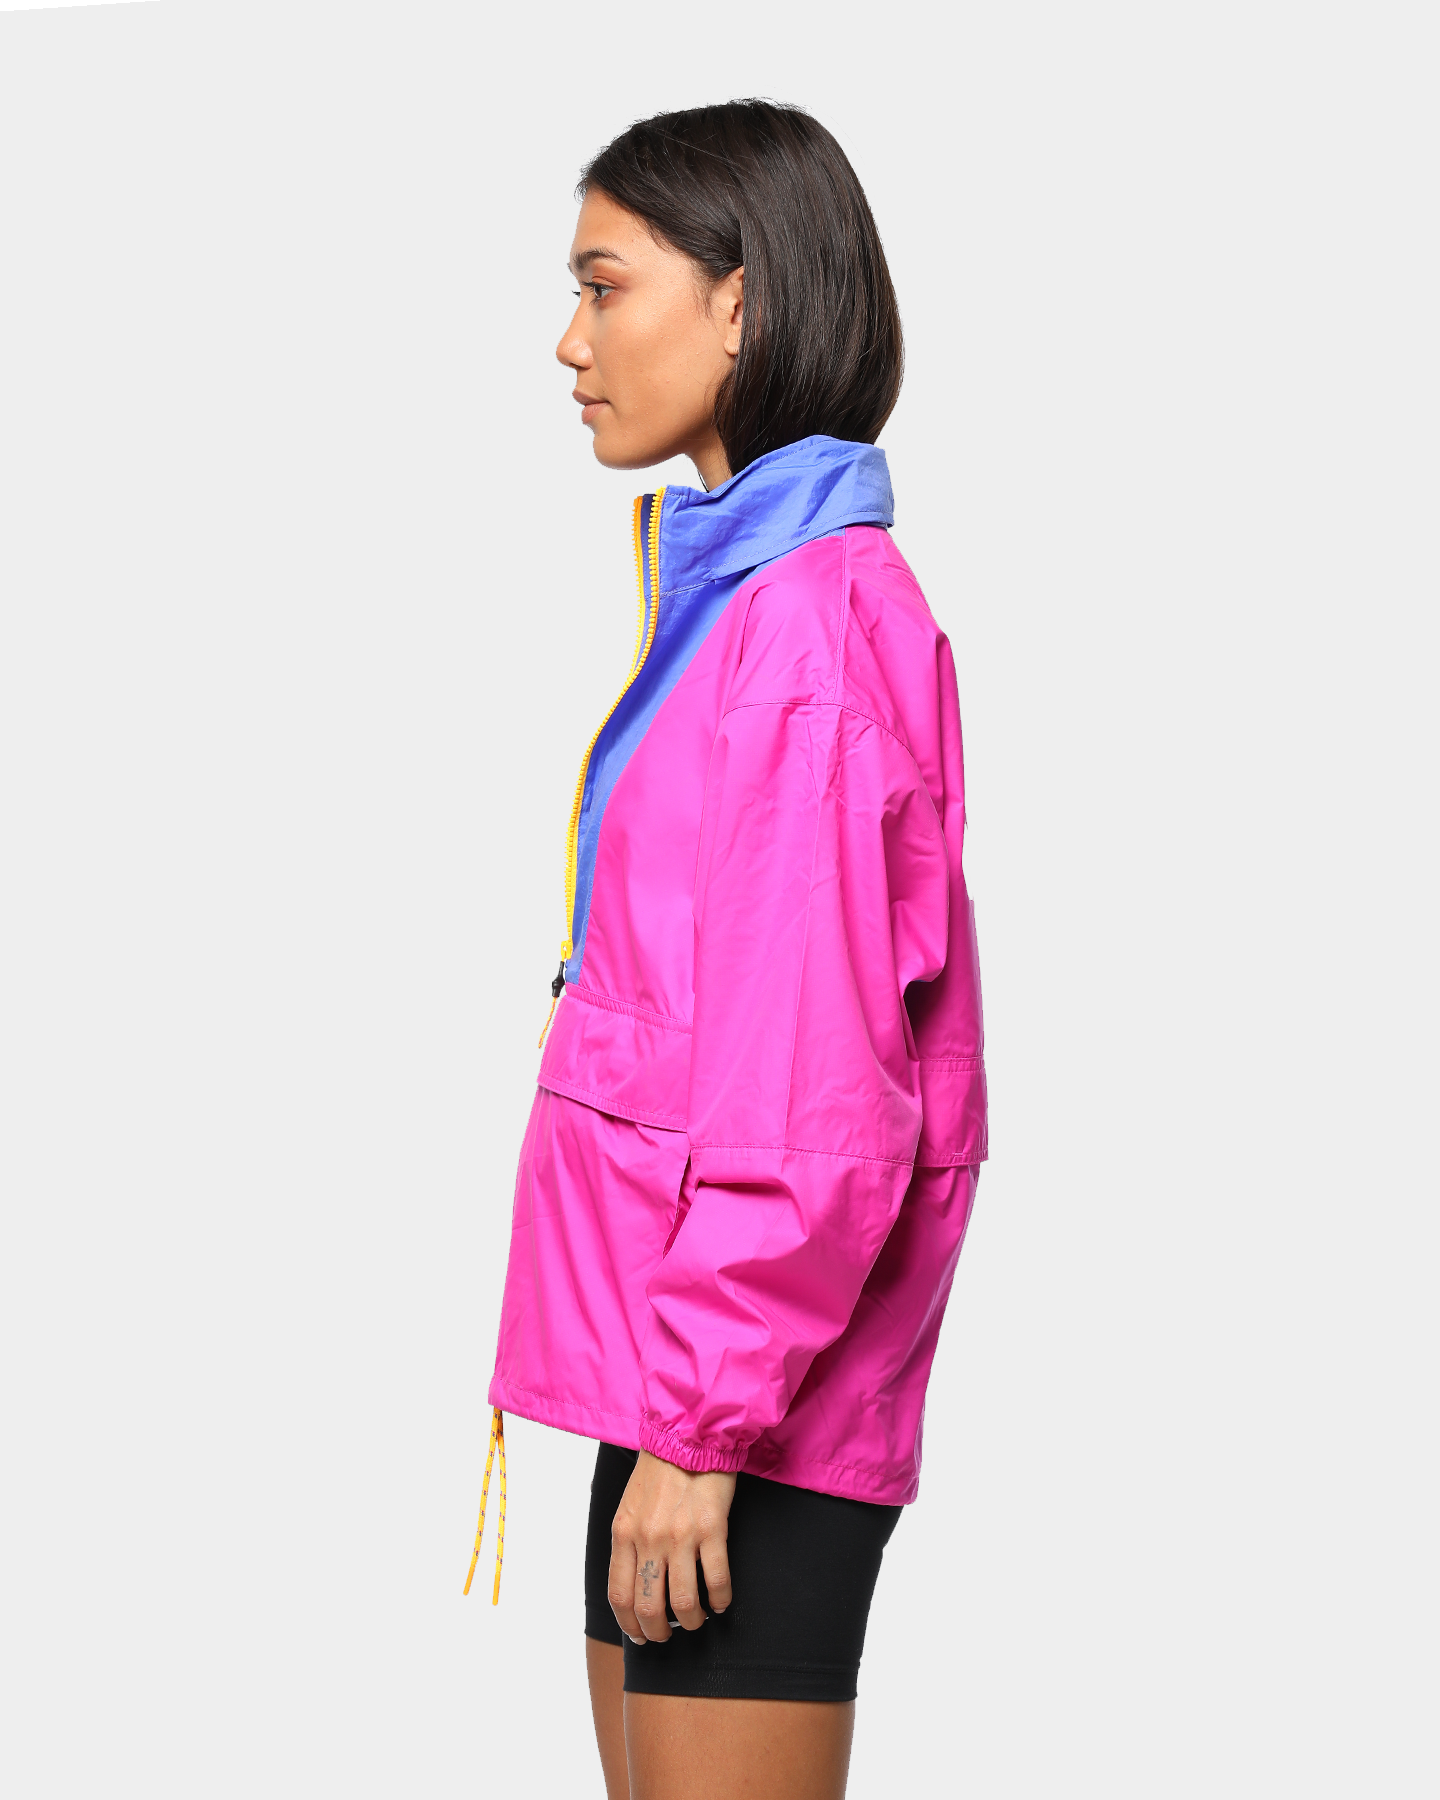 nike icon clash jacket fire pink